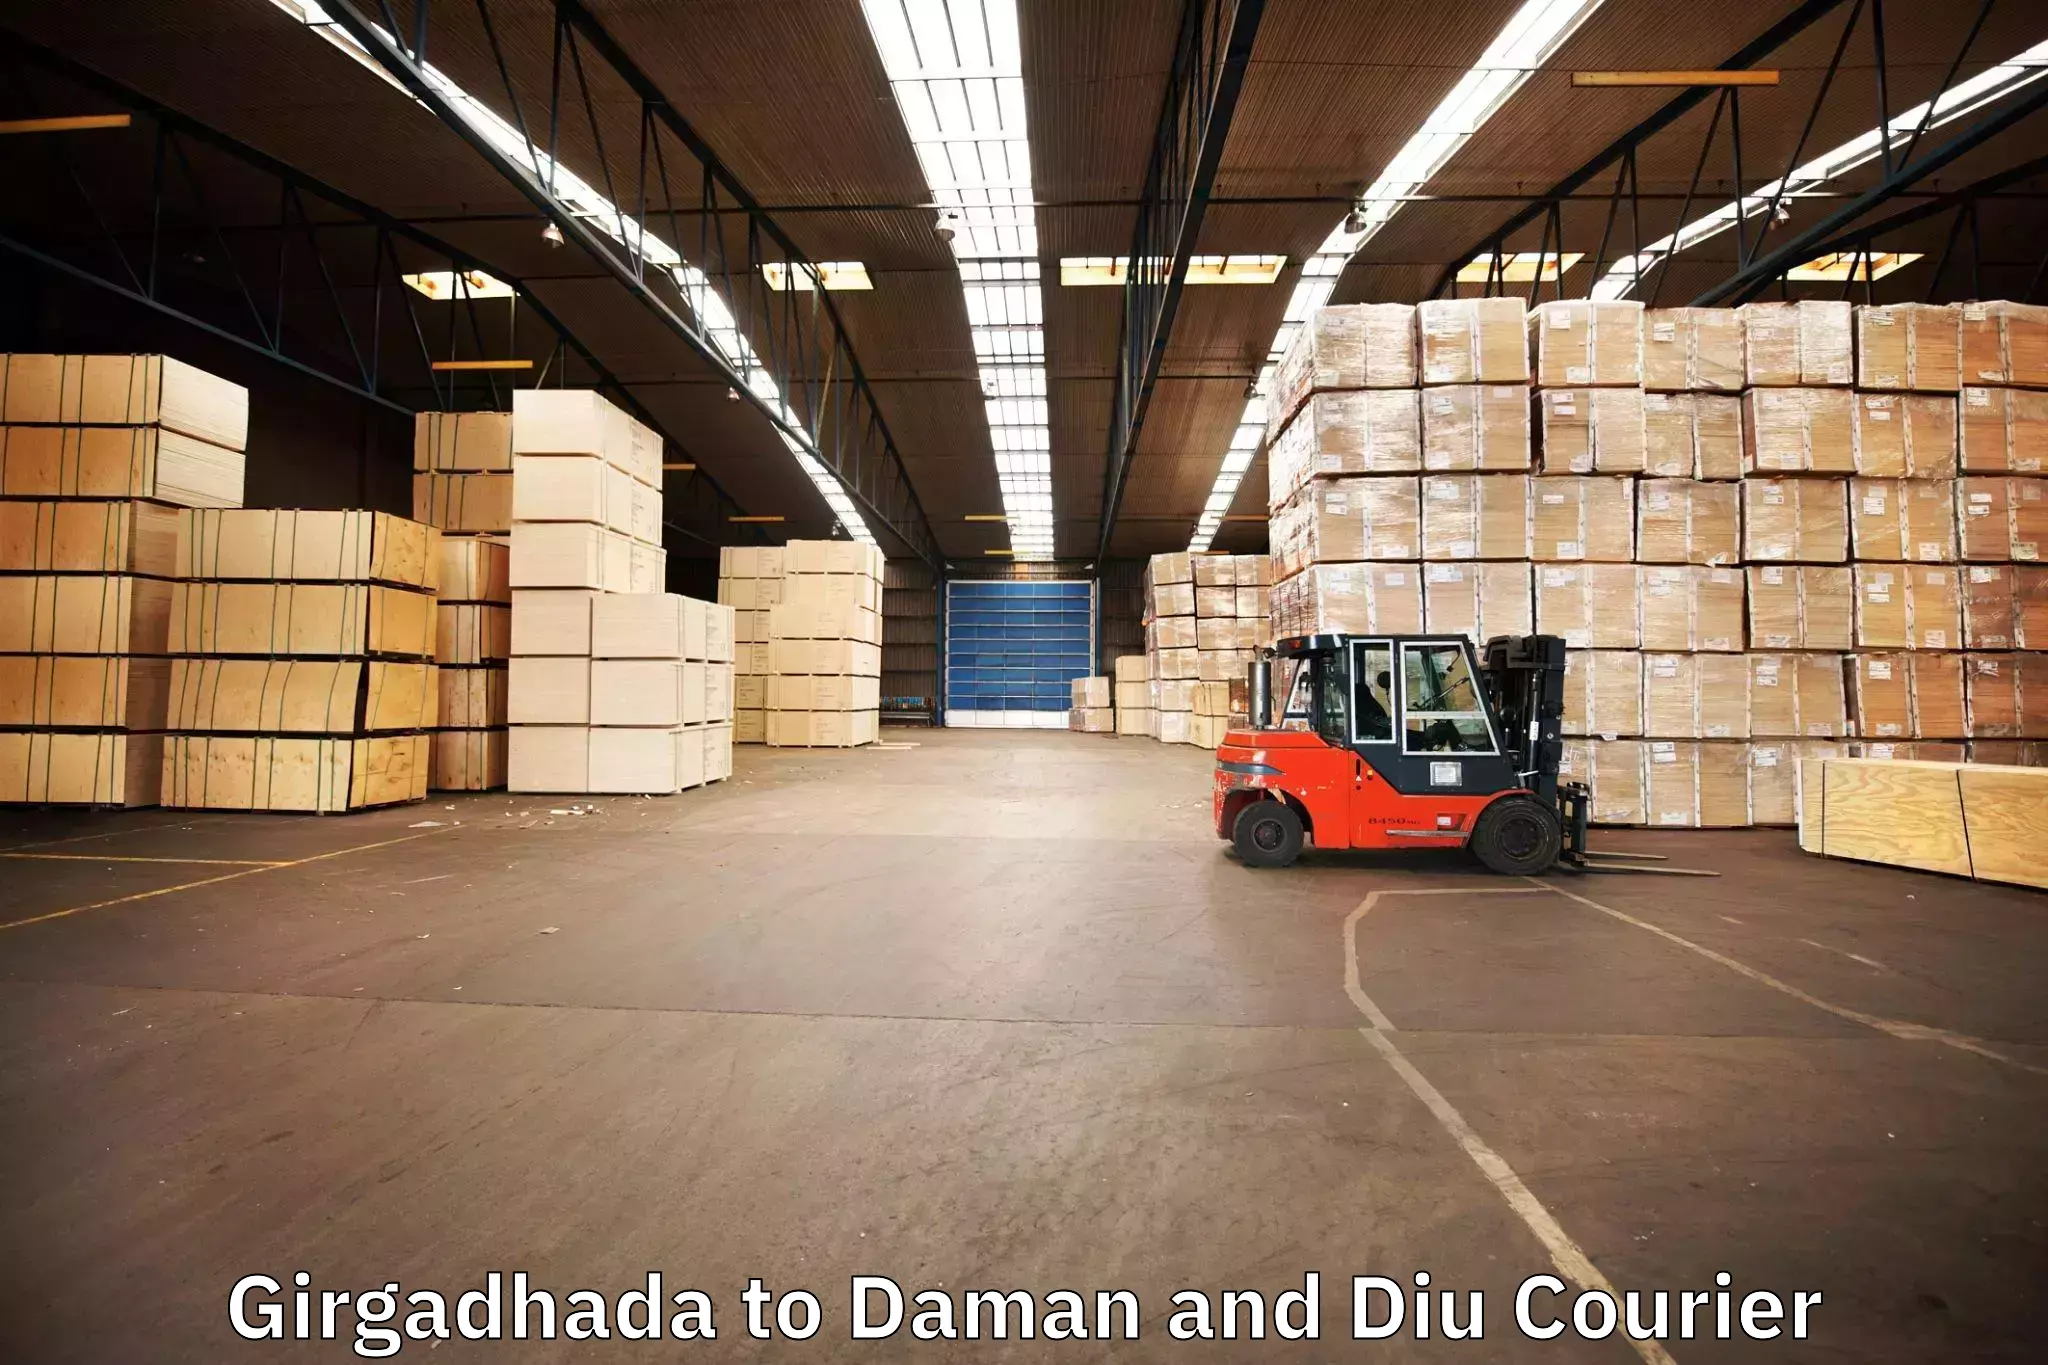 Comprehensive moving assistance in Girgadhada to Daman and Diu